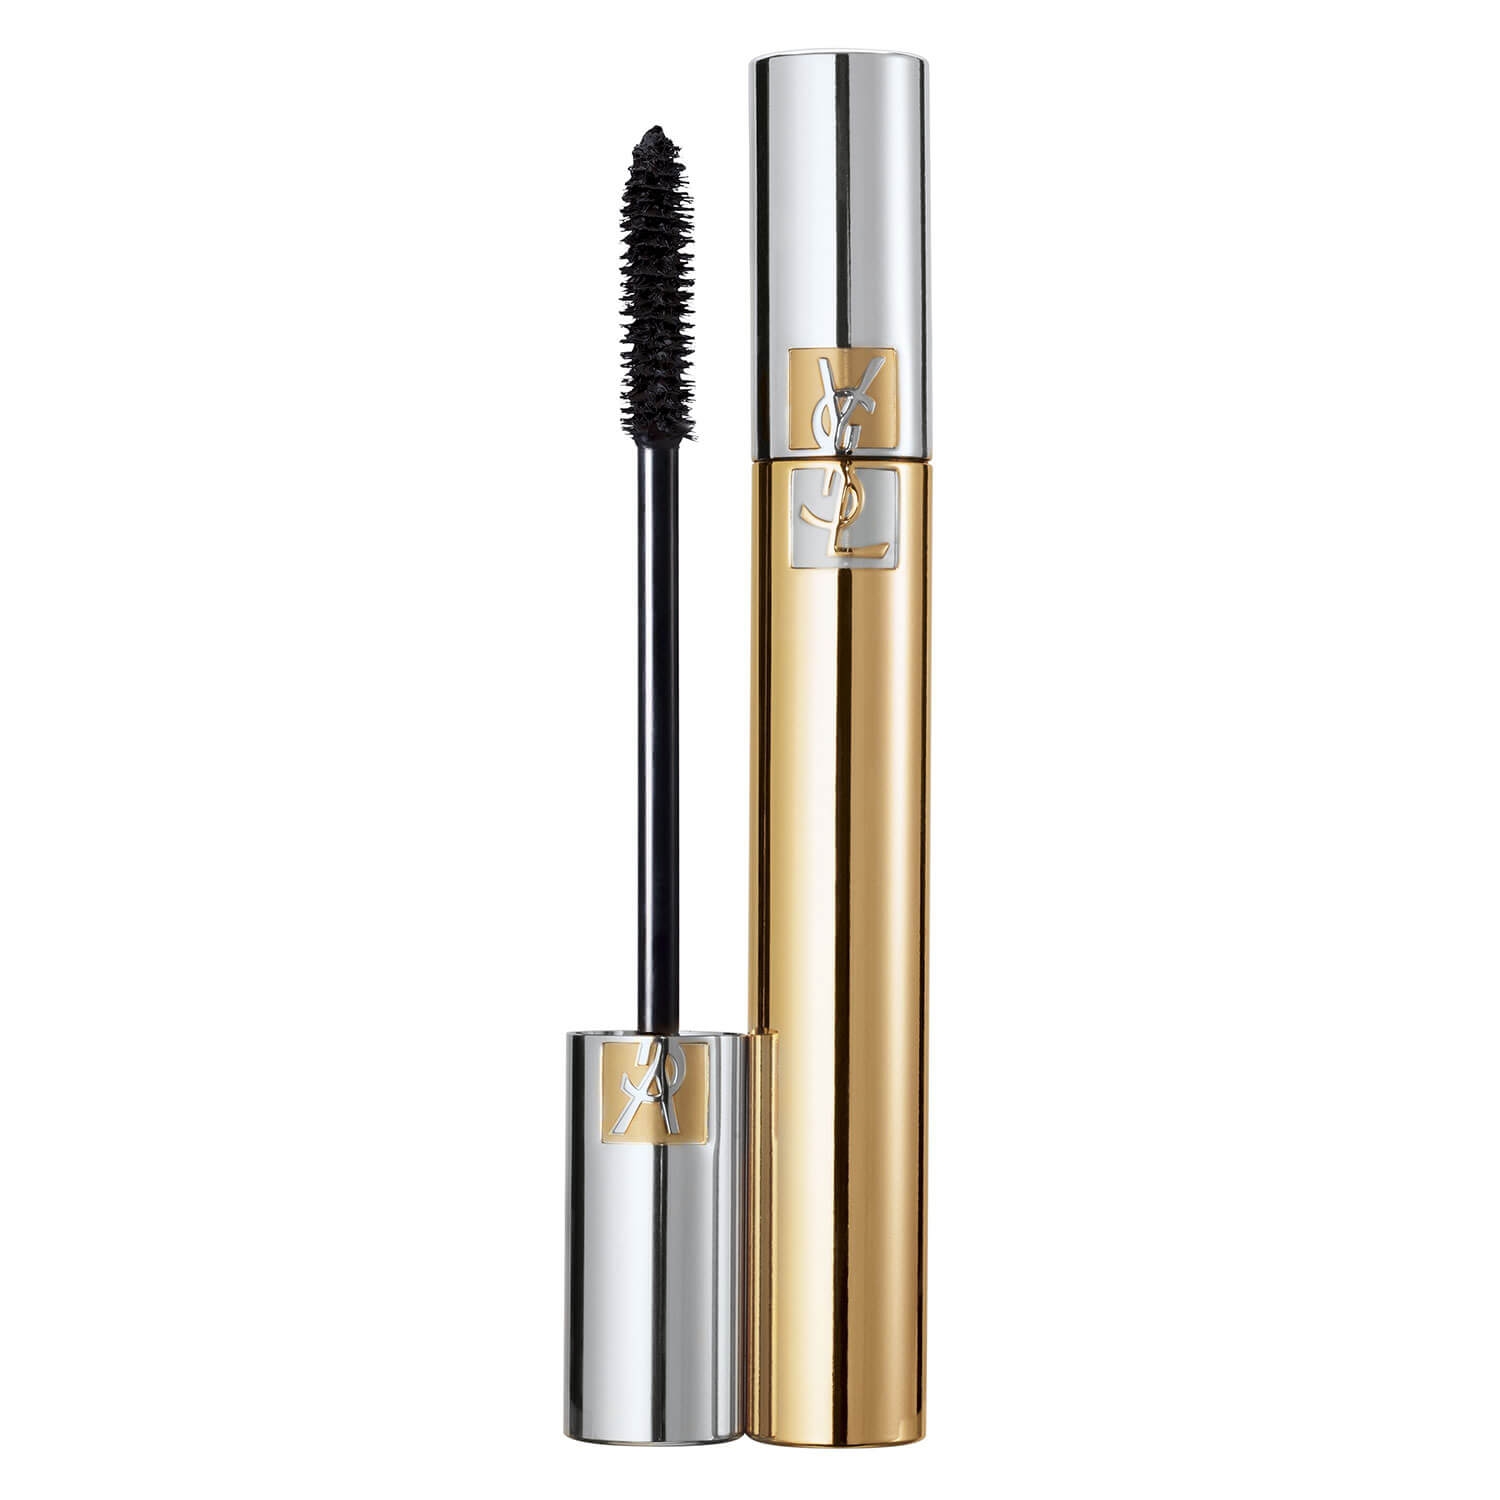 Product image from YSL Mascara - Volume Effet Faux Cils Noir 01